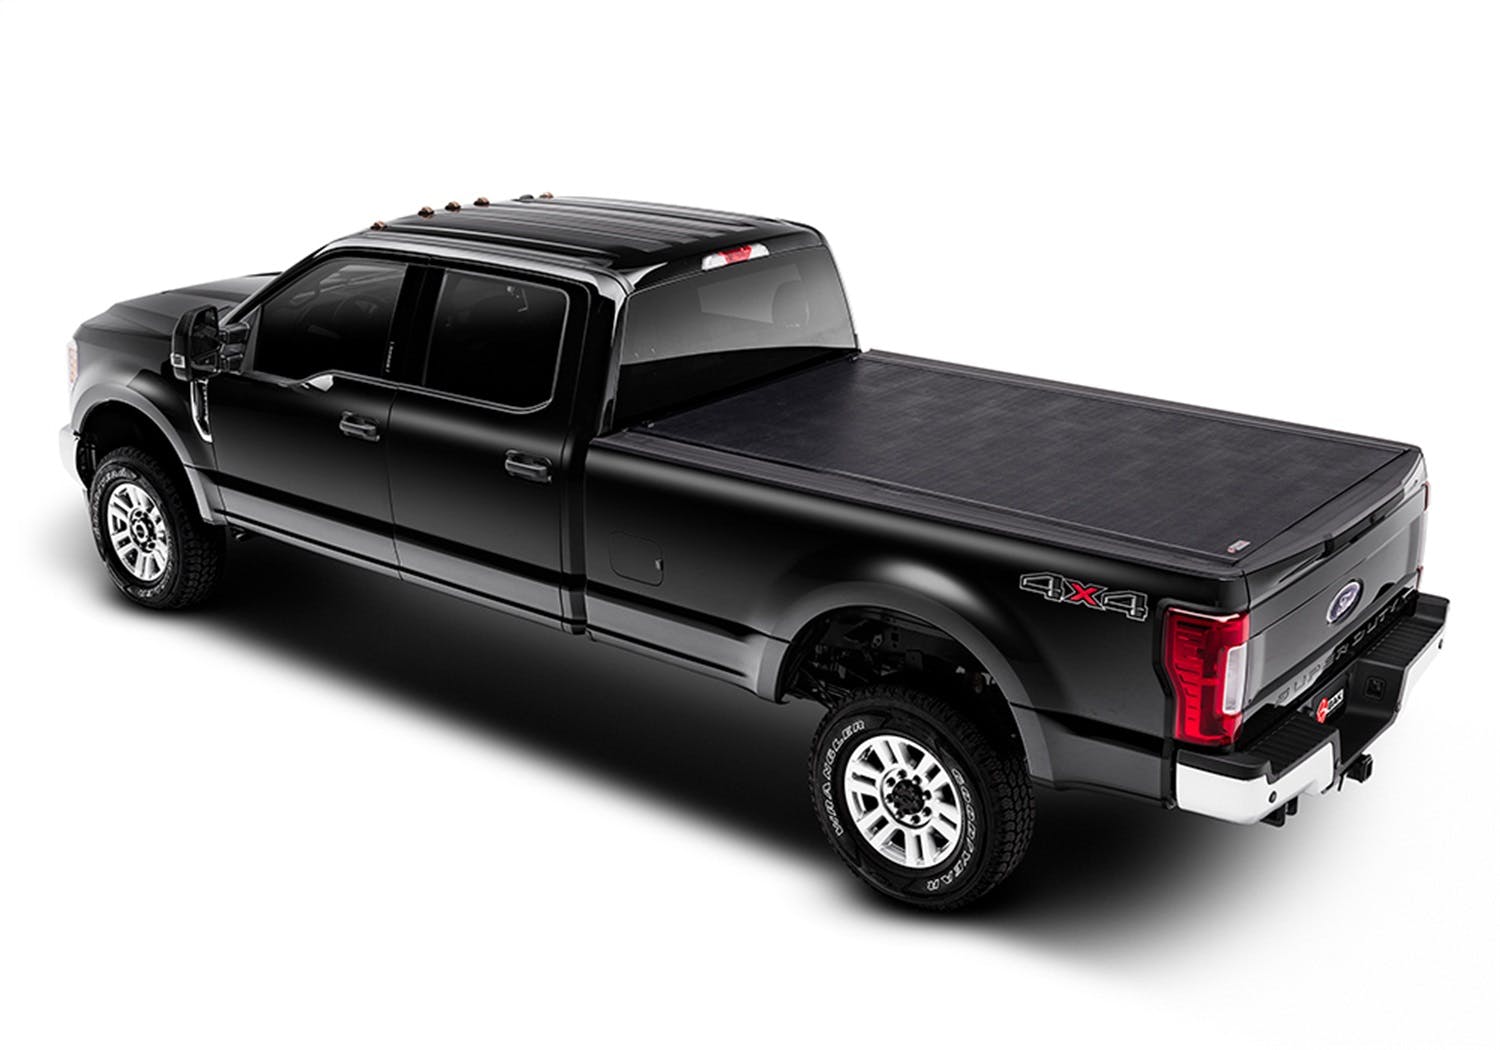 BAK Industries 39303 Revolver X2 Hard Rolling Truck Bed Cover